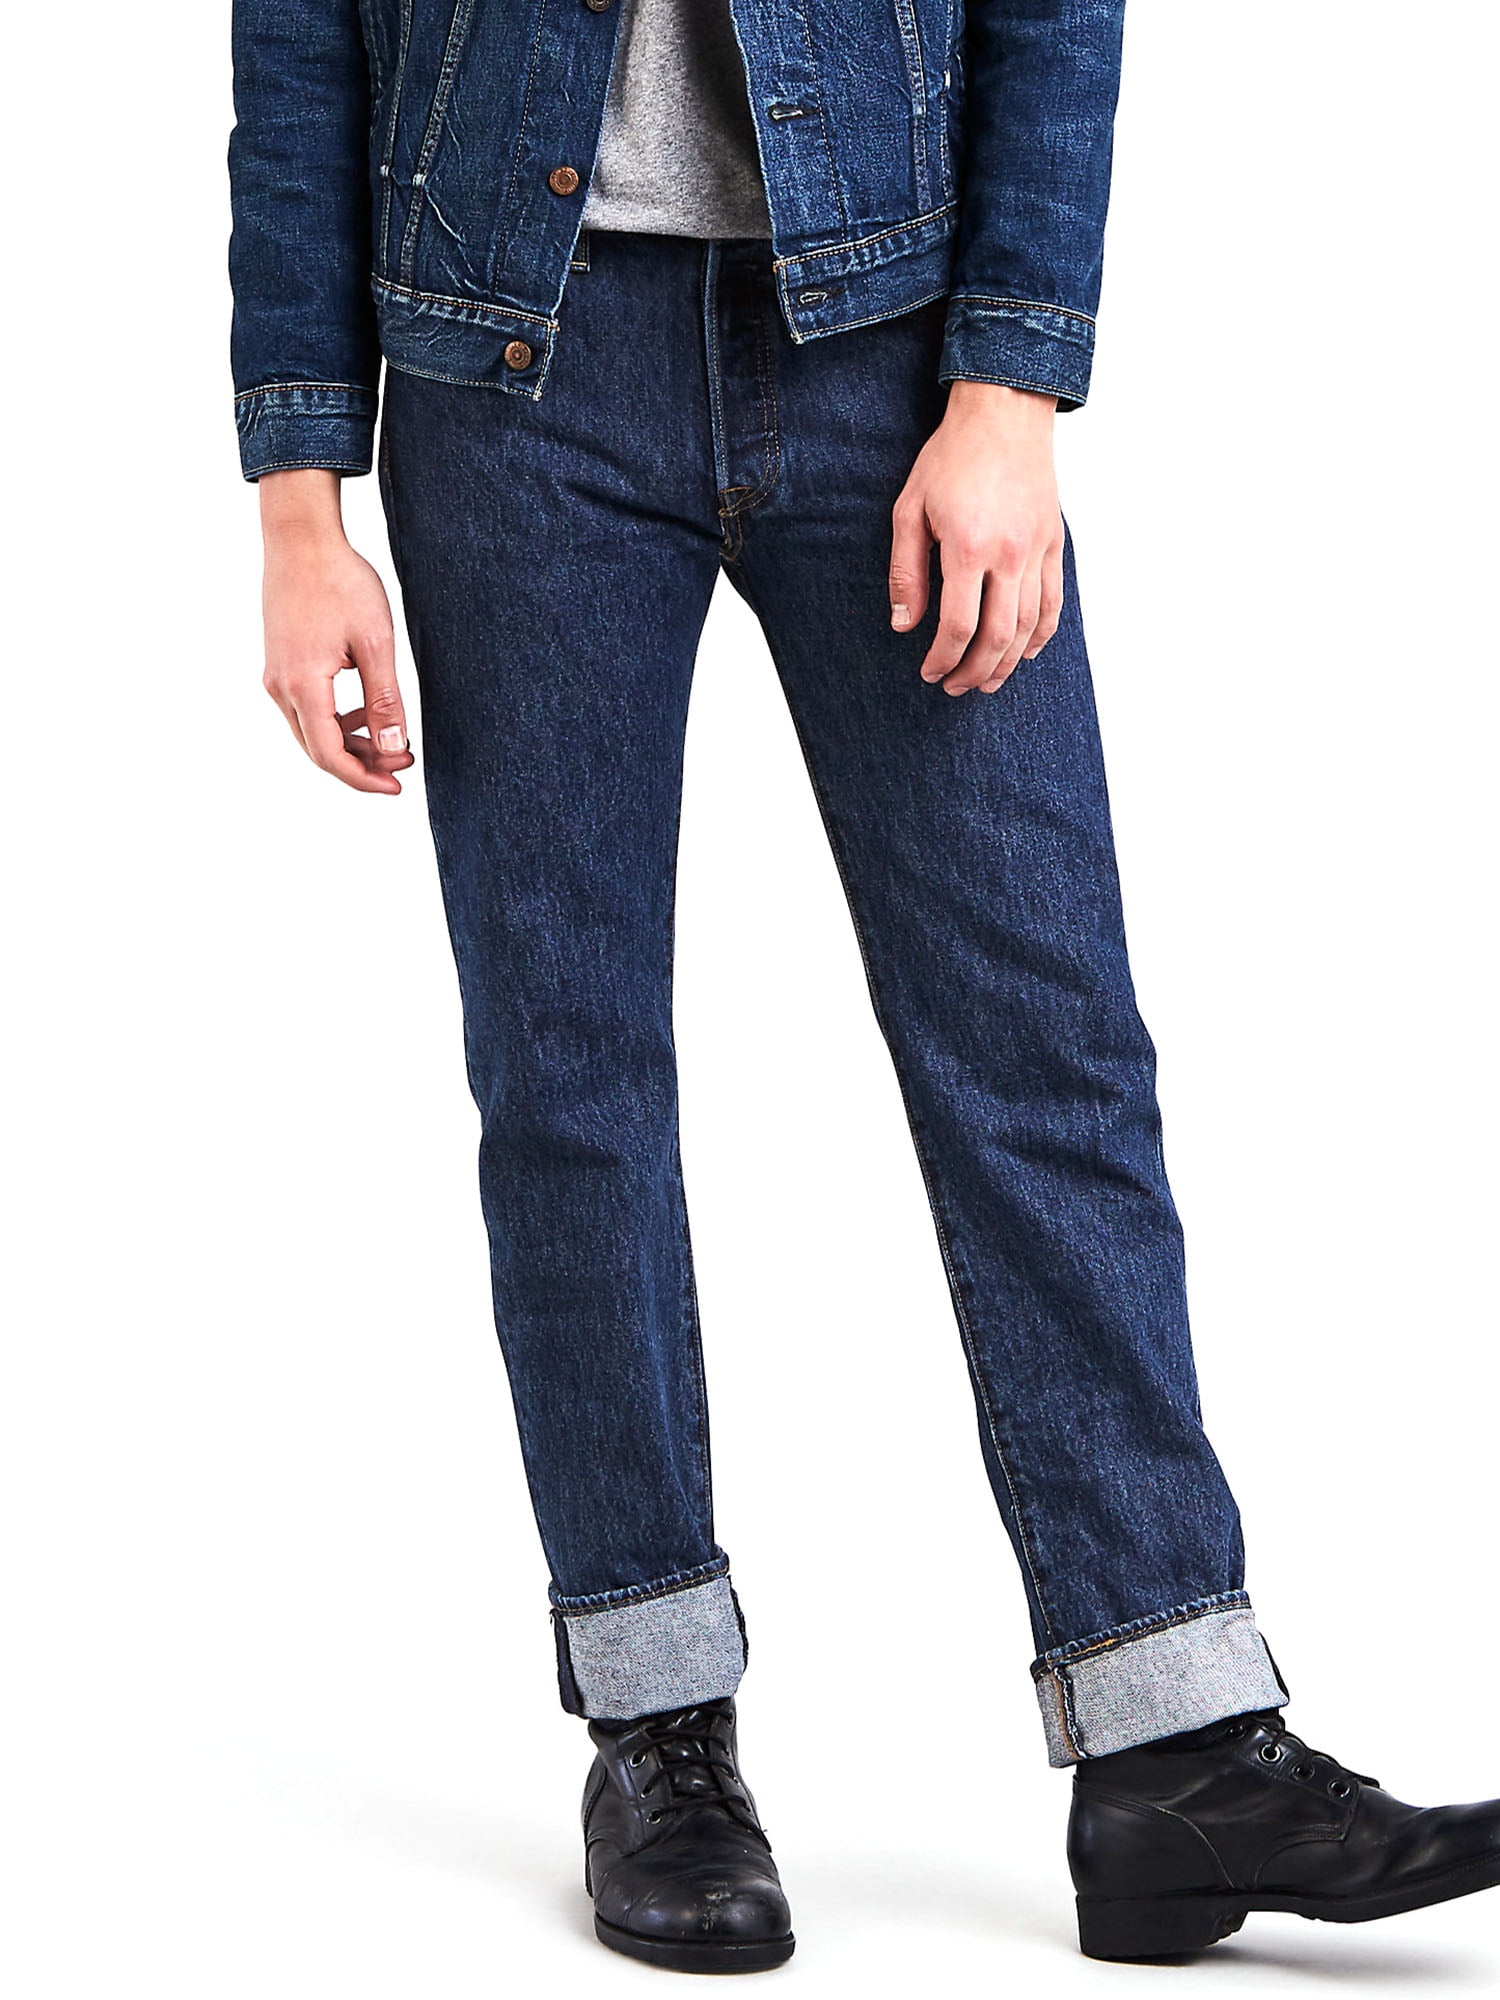 Vintage Levi's 505 Washed Black Jean | Urban Outfitters